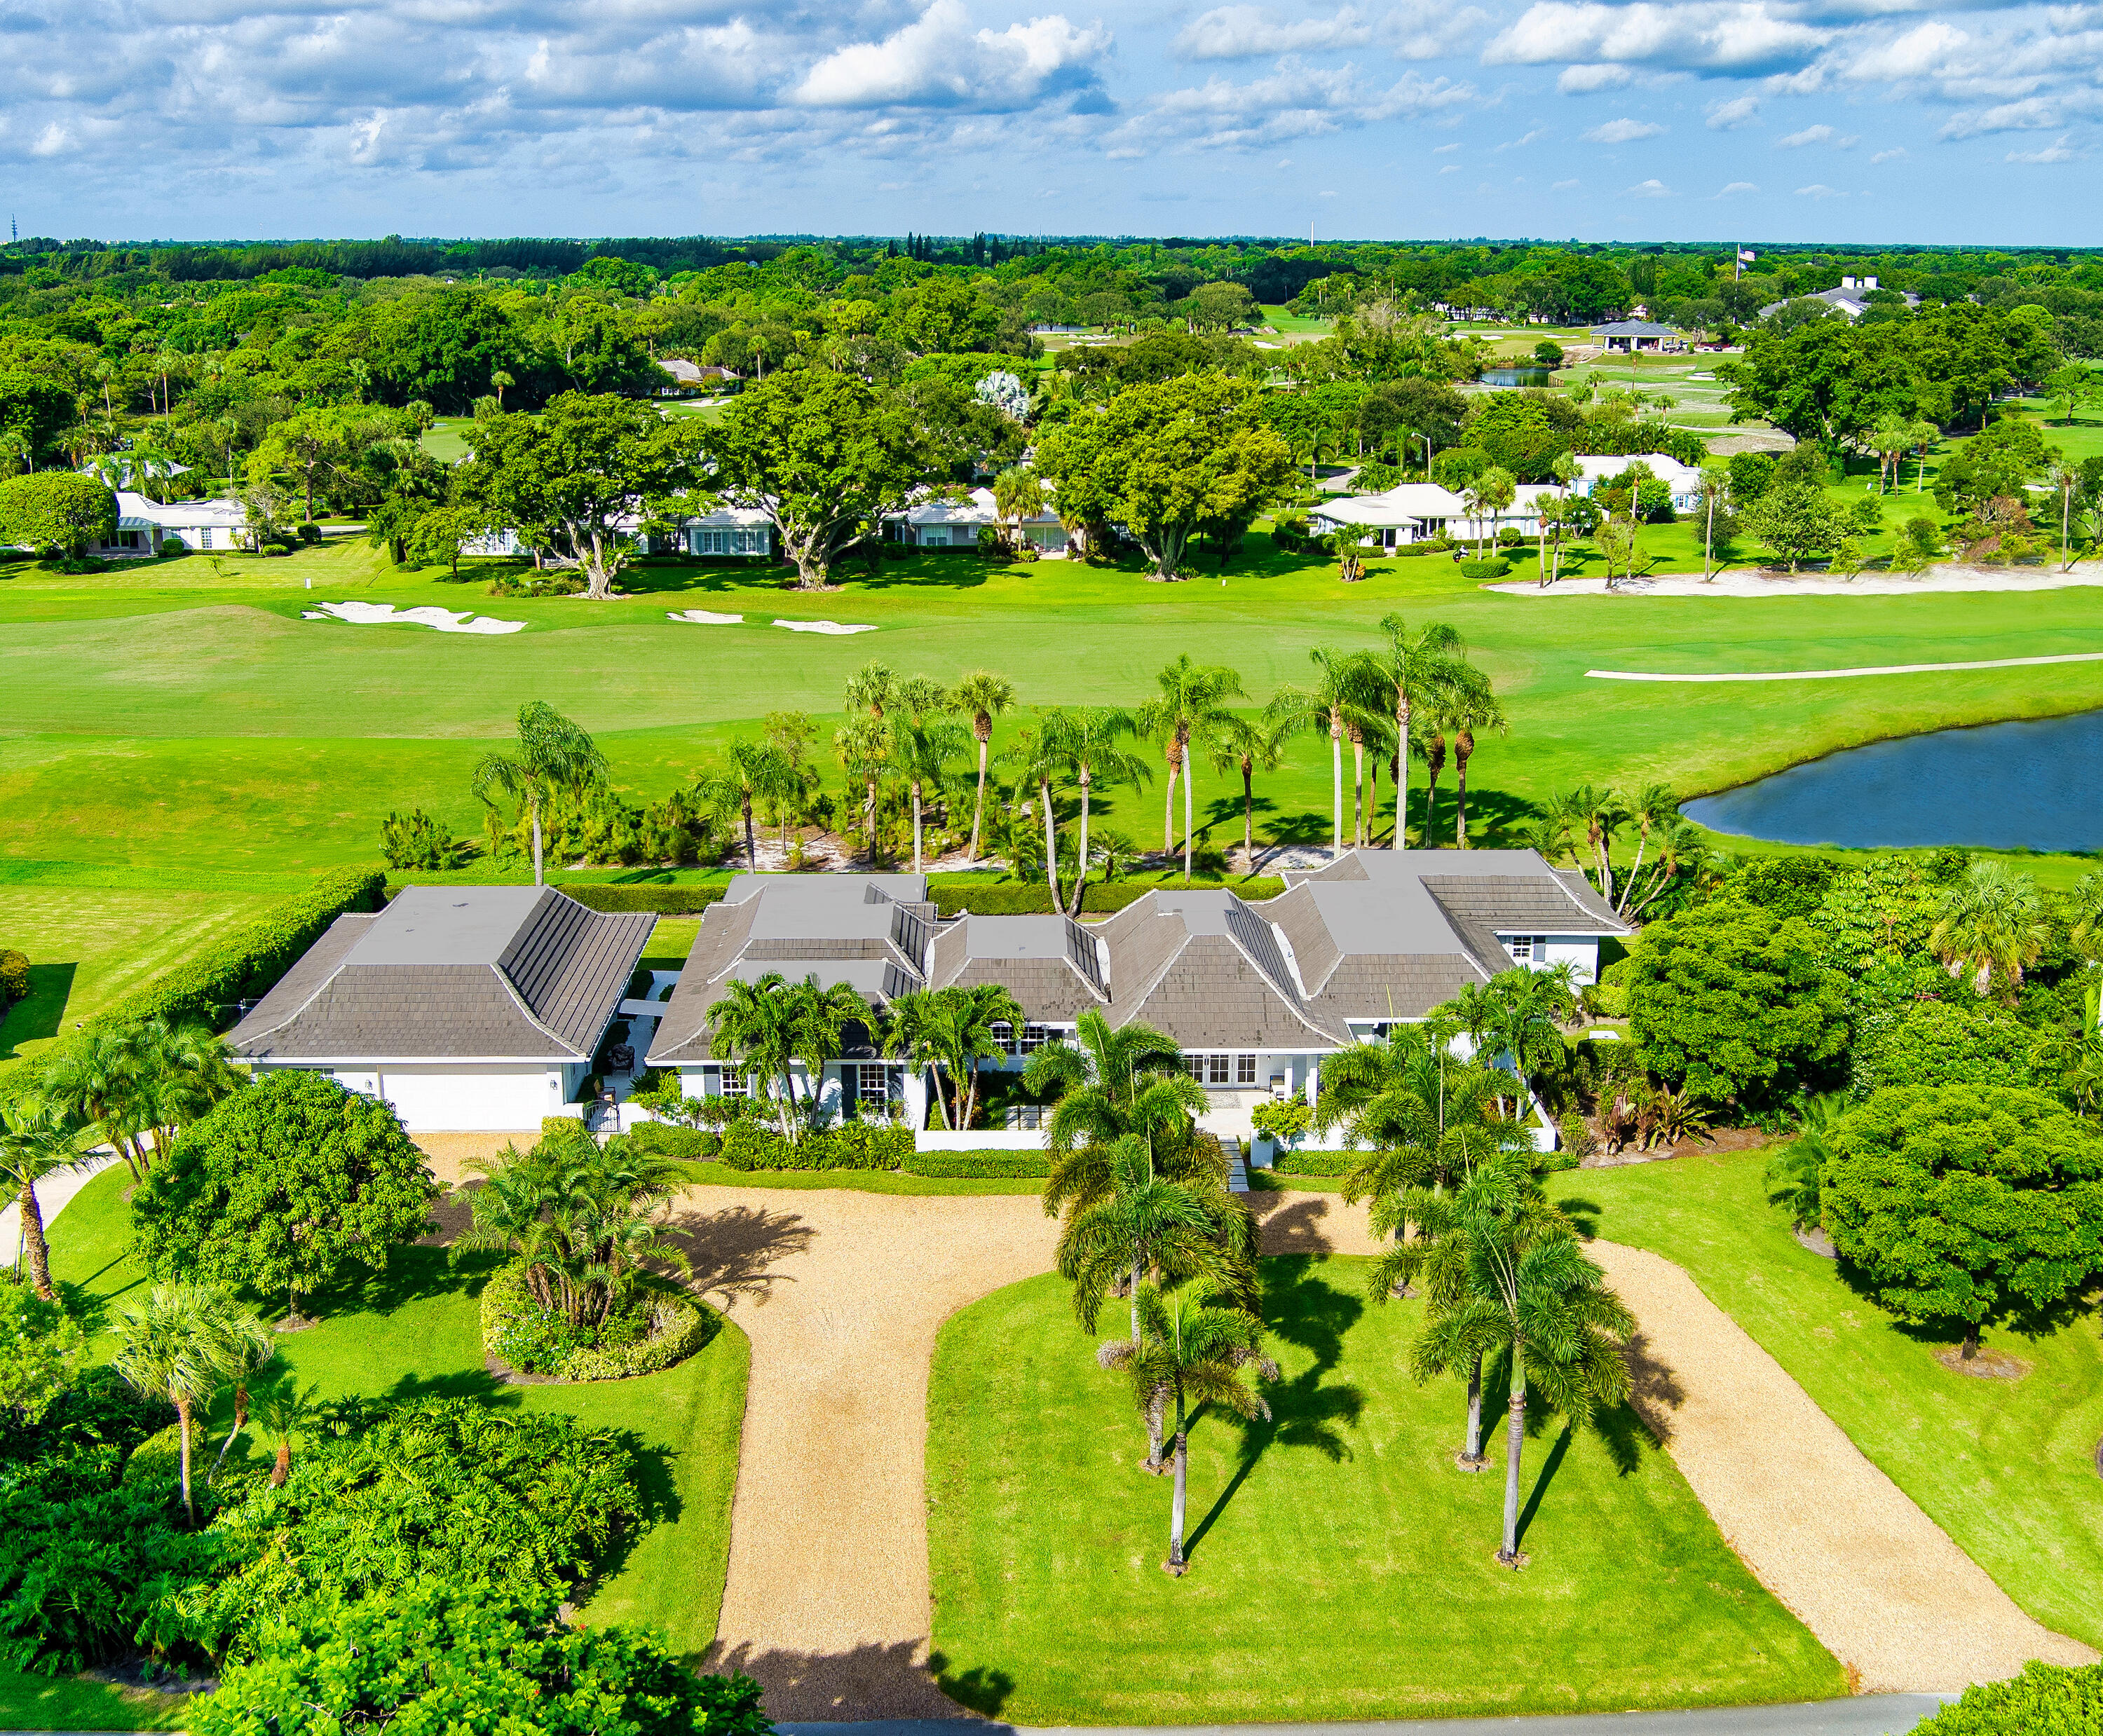 1 Country Road, Village Of Golf, Palm Beach County, Florida - 6 Bedrooms  
6.5 Bathrooms - 